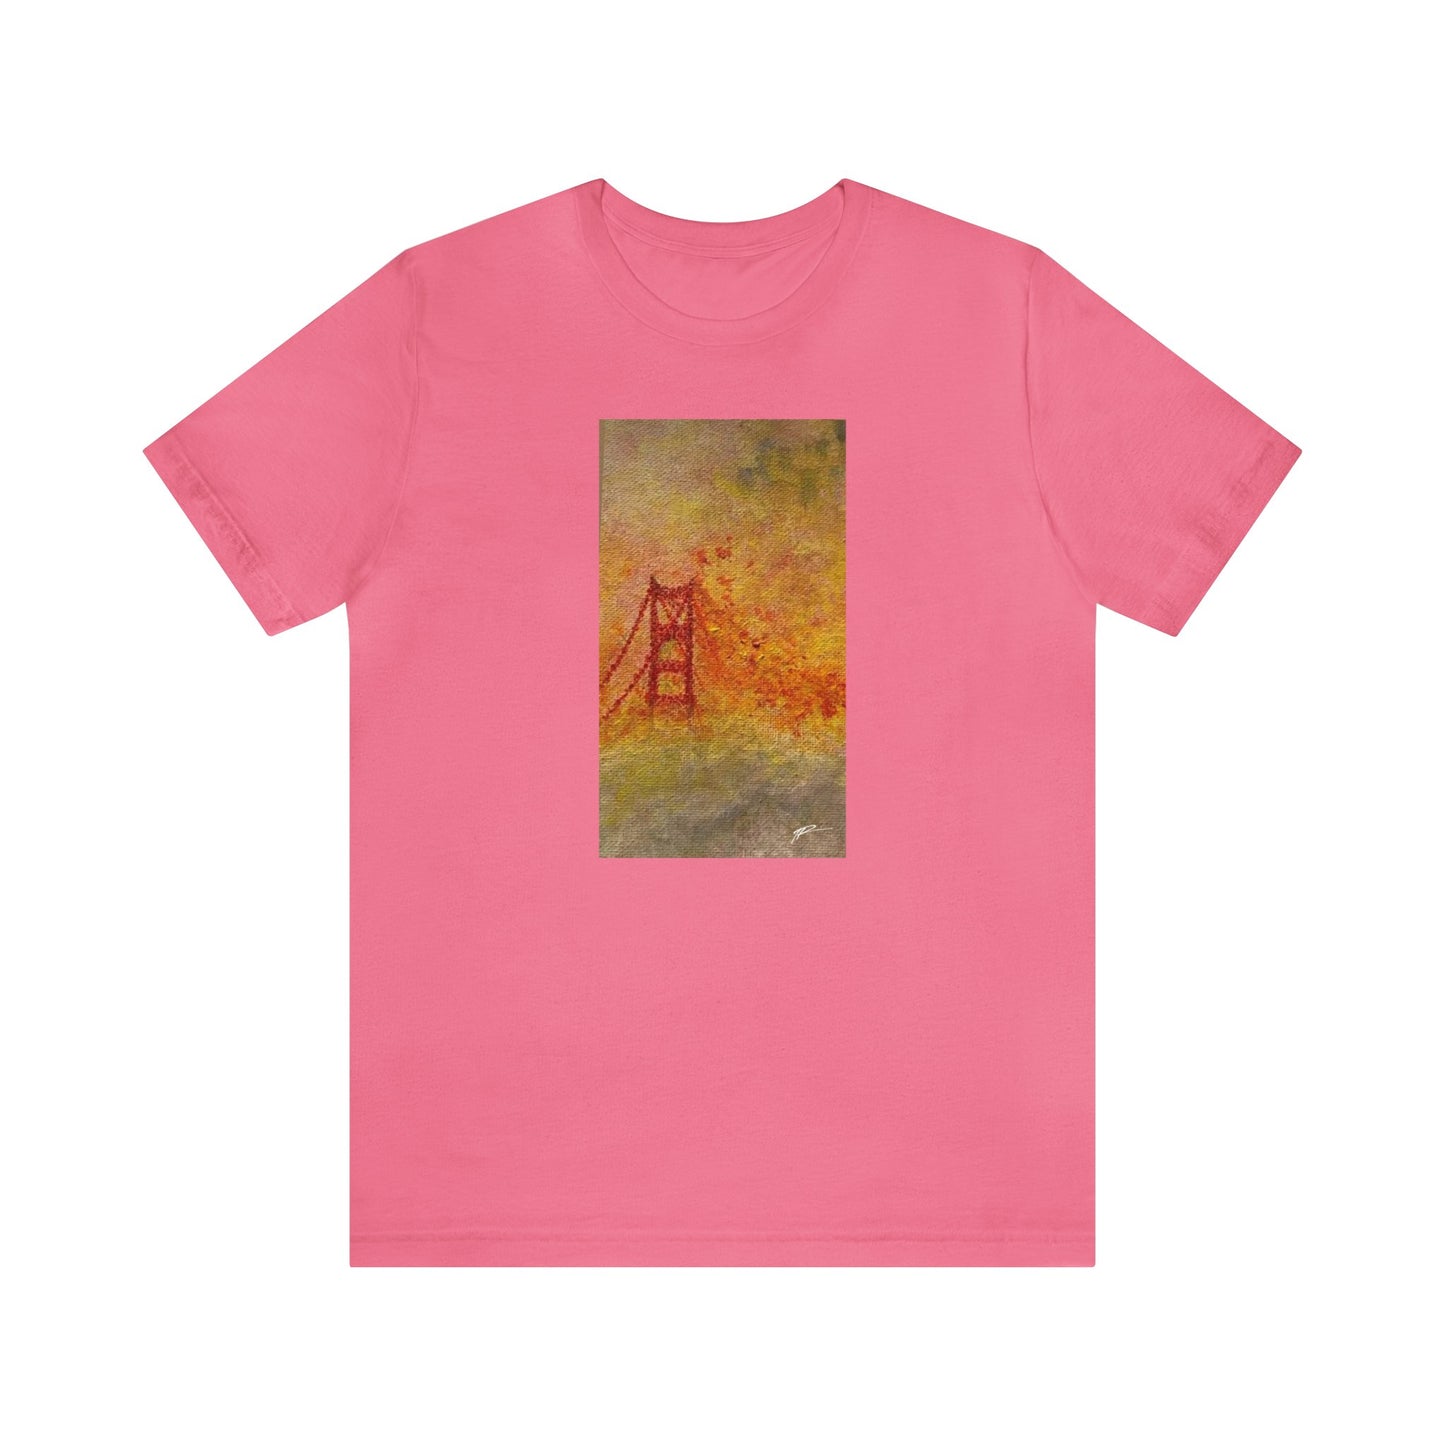 Tipping Points SF Unisex Super Soft Shirt